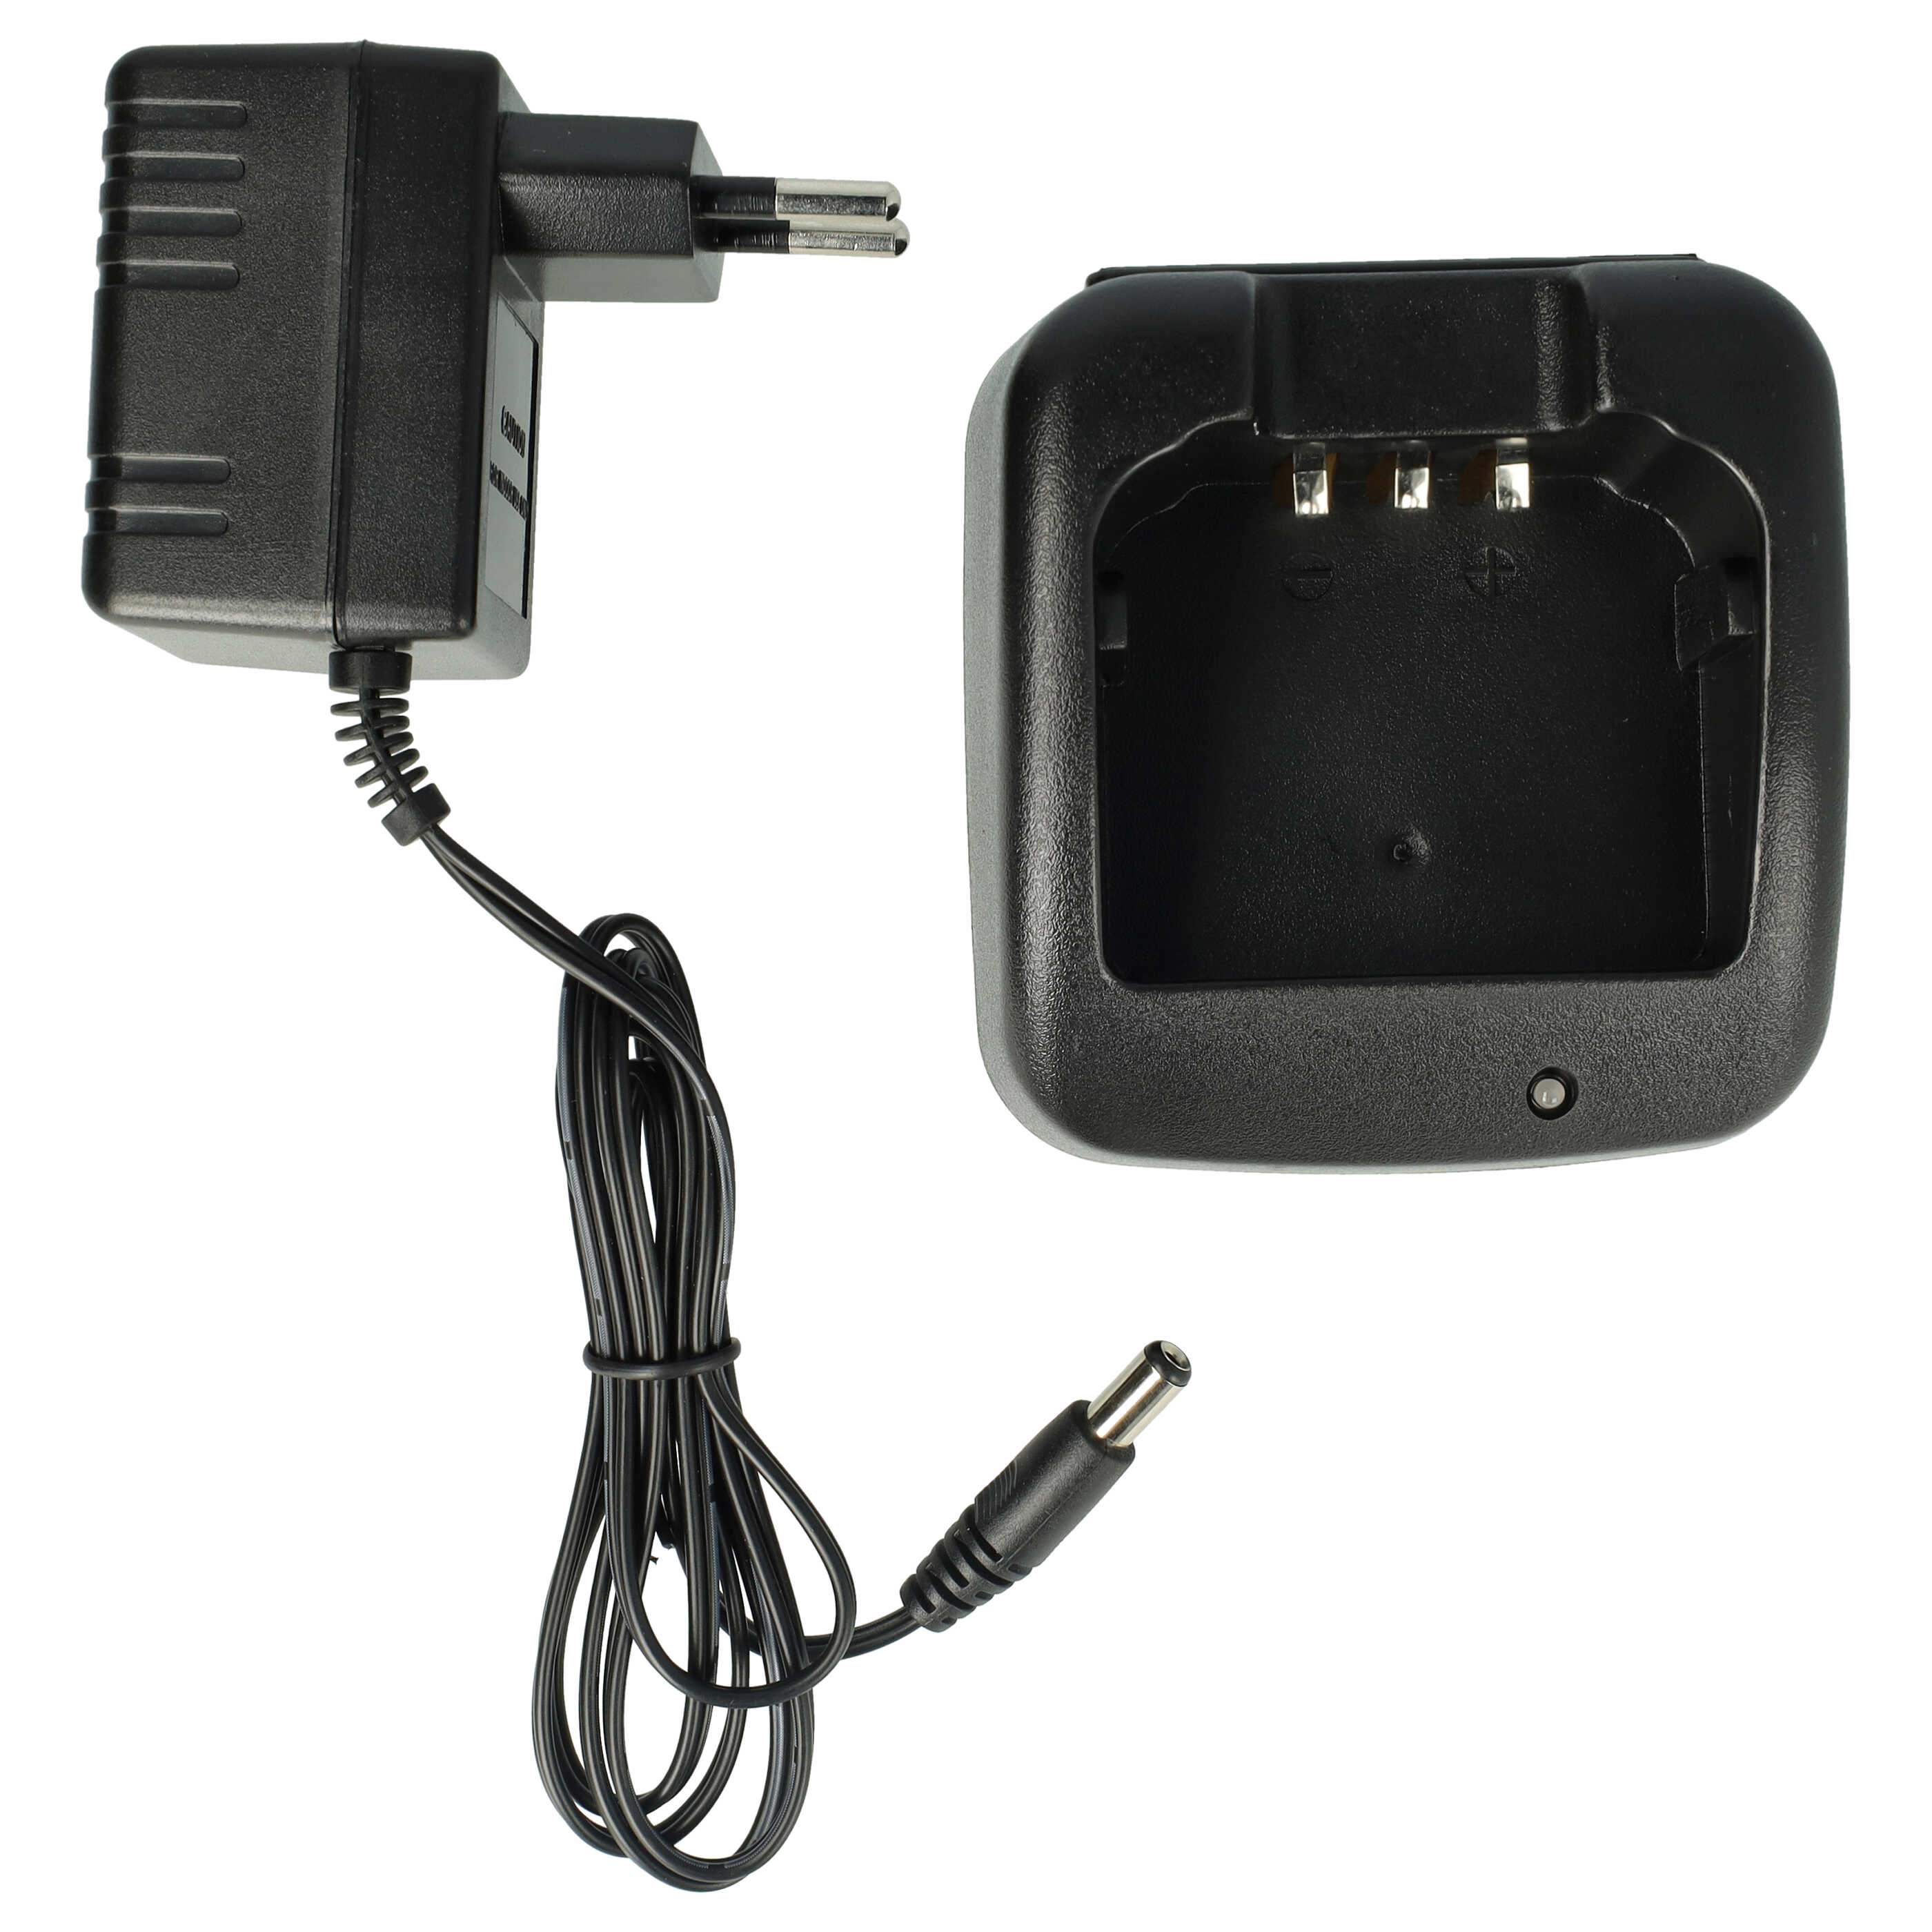 Charger Suitable for Icom IC-F3031S Radio Batteries - 12 V, 0.5 A